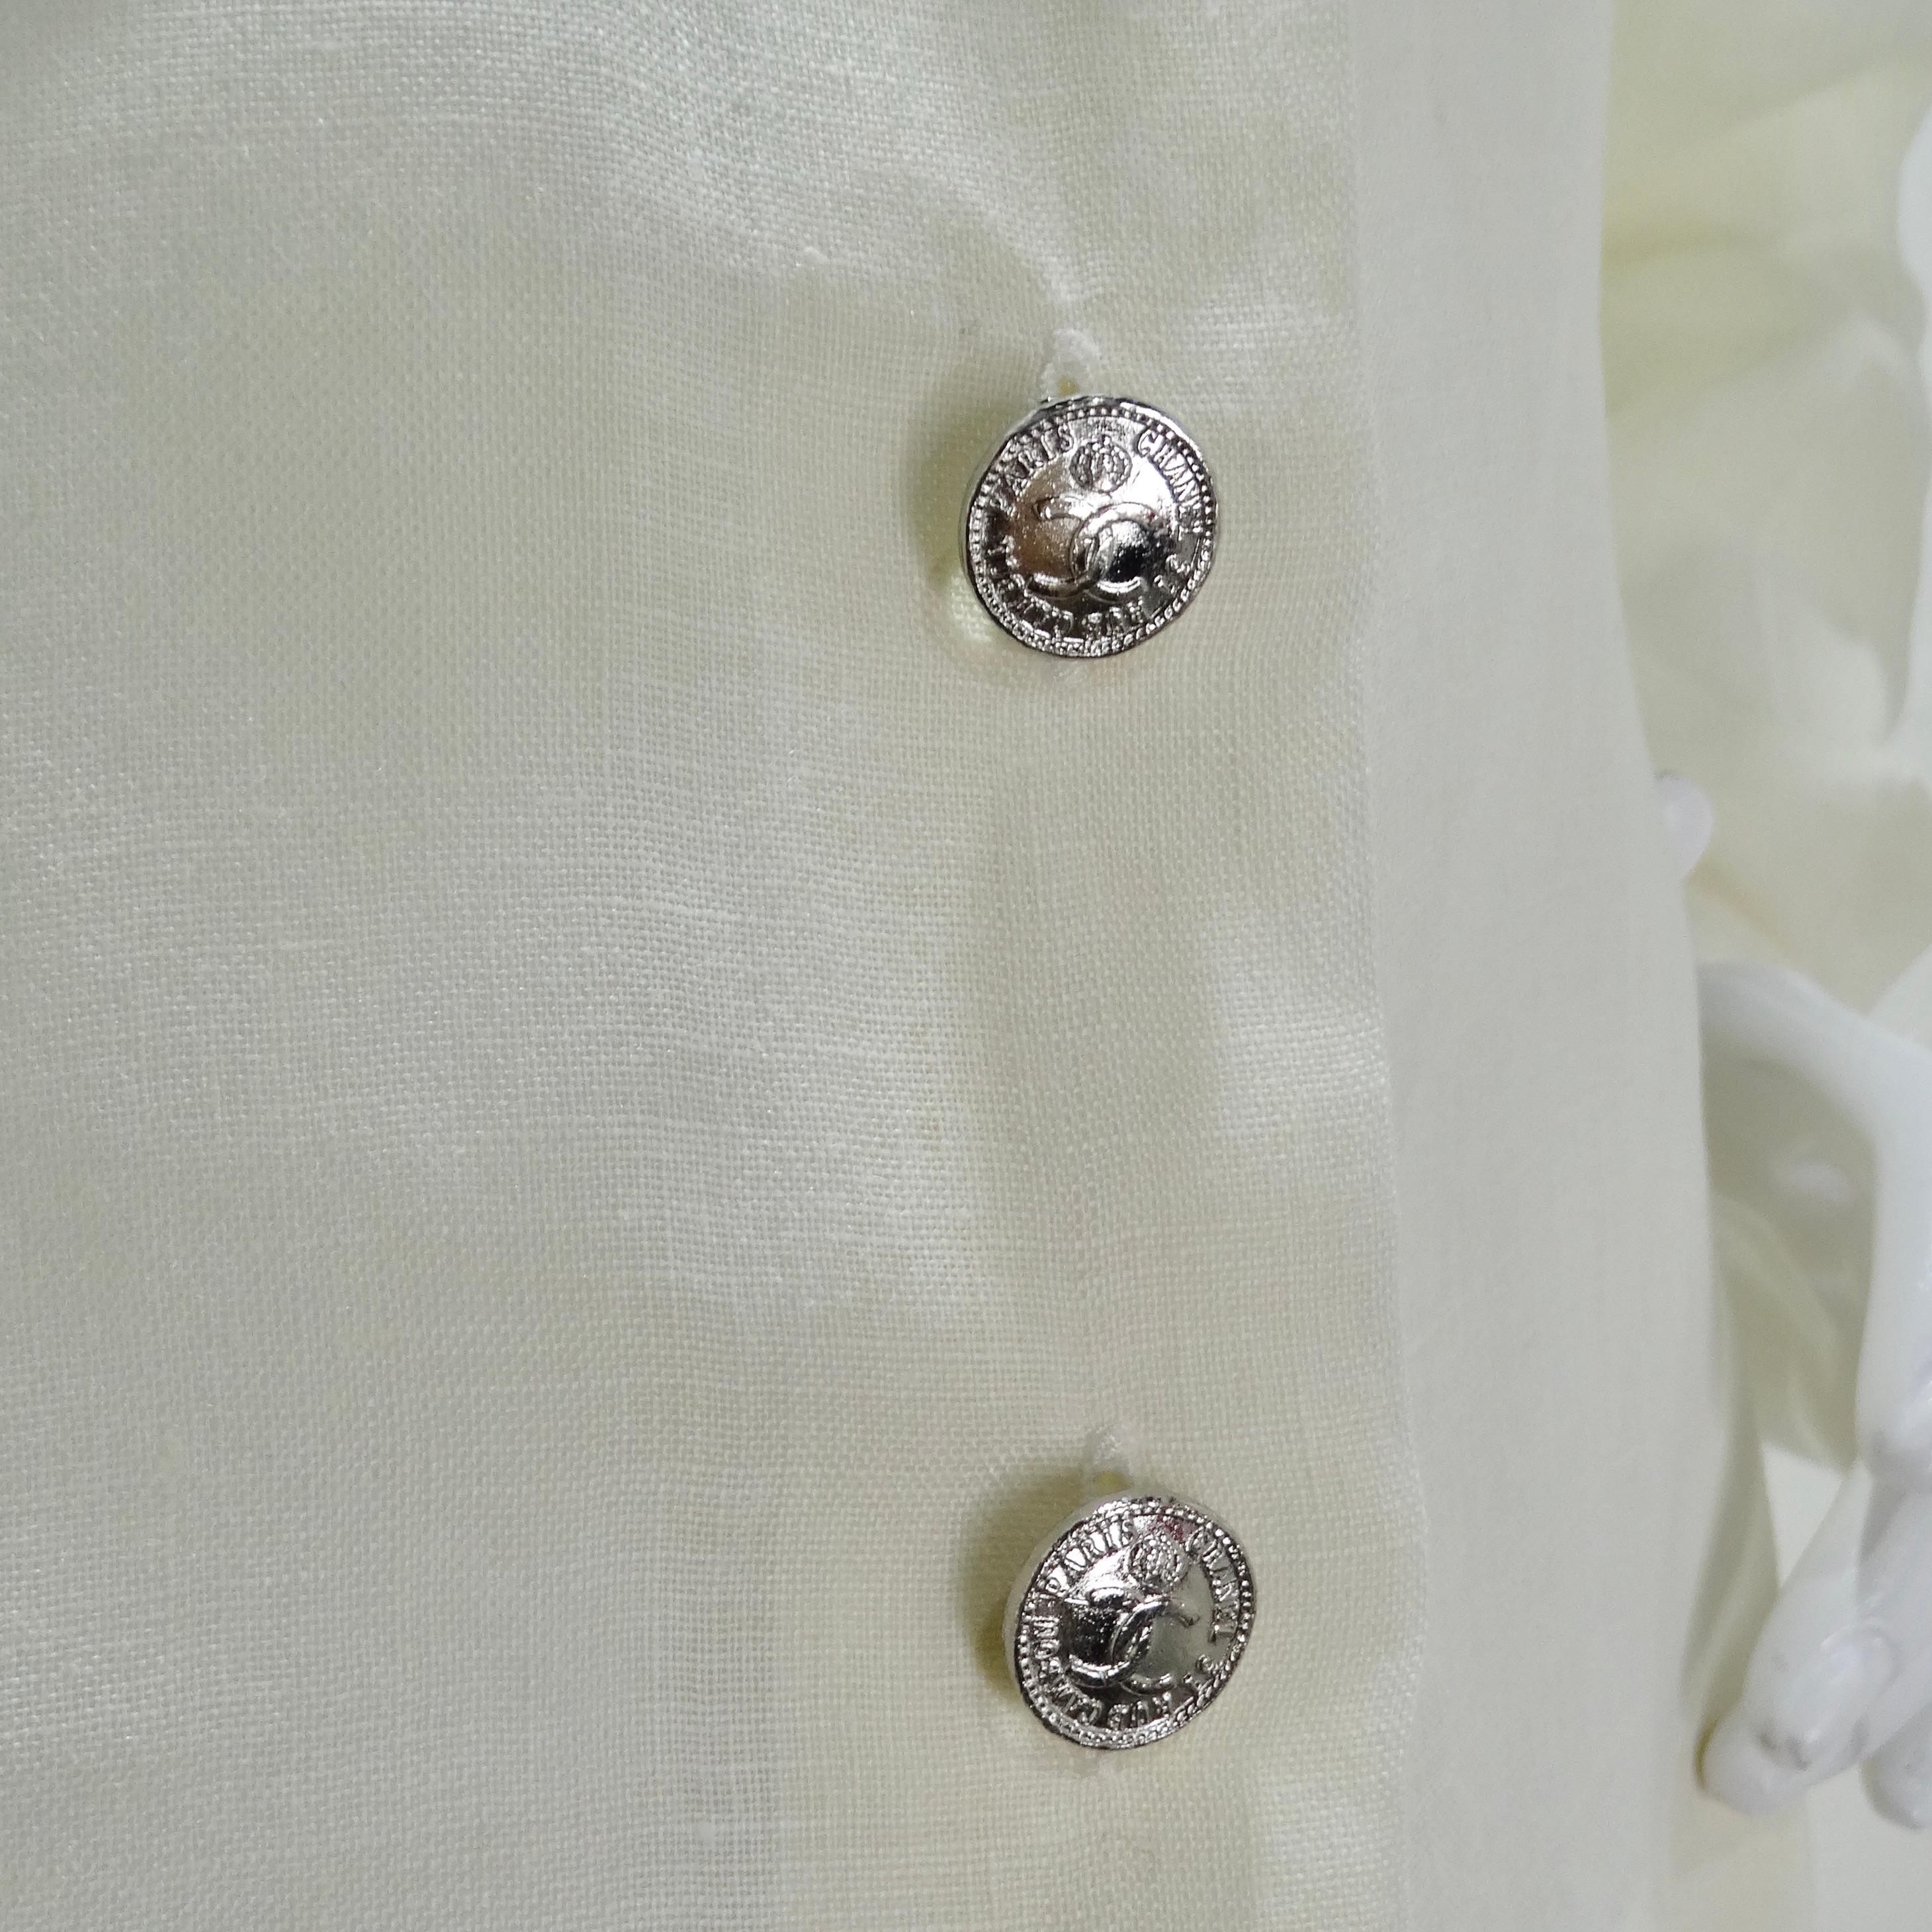 Chanel 90s White Linen Button Down Shirt In Excellent Condition For Sale In Scottsdale, AZ